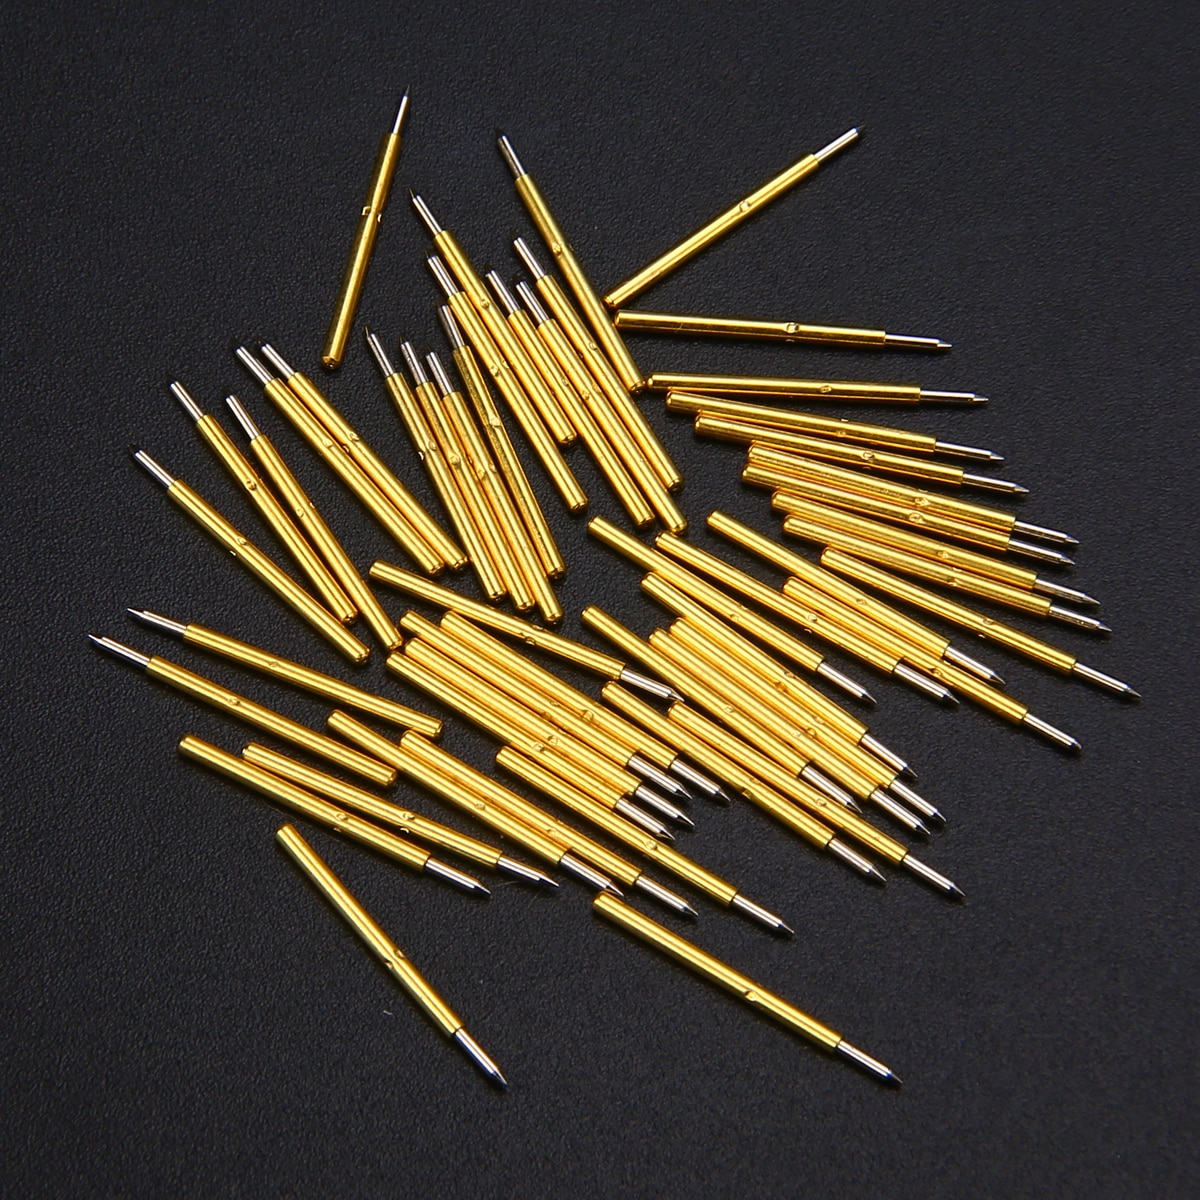 50pcs/set New P75-B1 Dia 1.02mm 100g Cusp Spear Spring Loaded Test Probes Pogo Pins For Home Tool